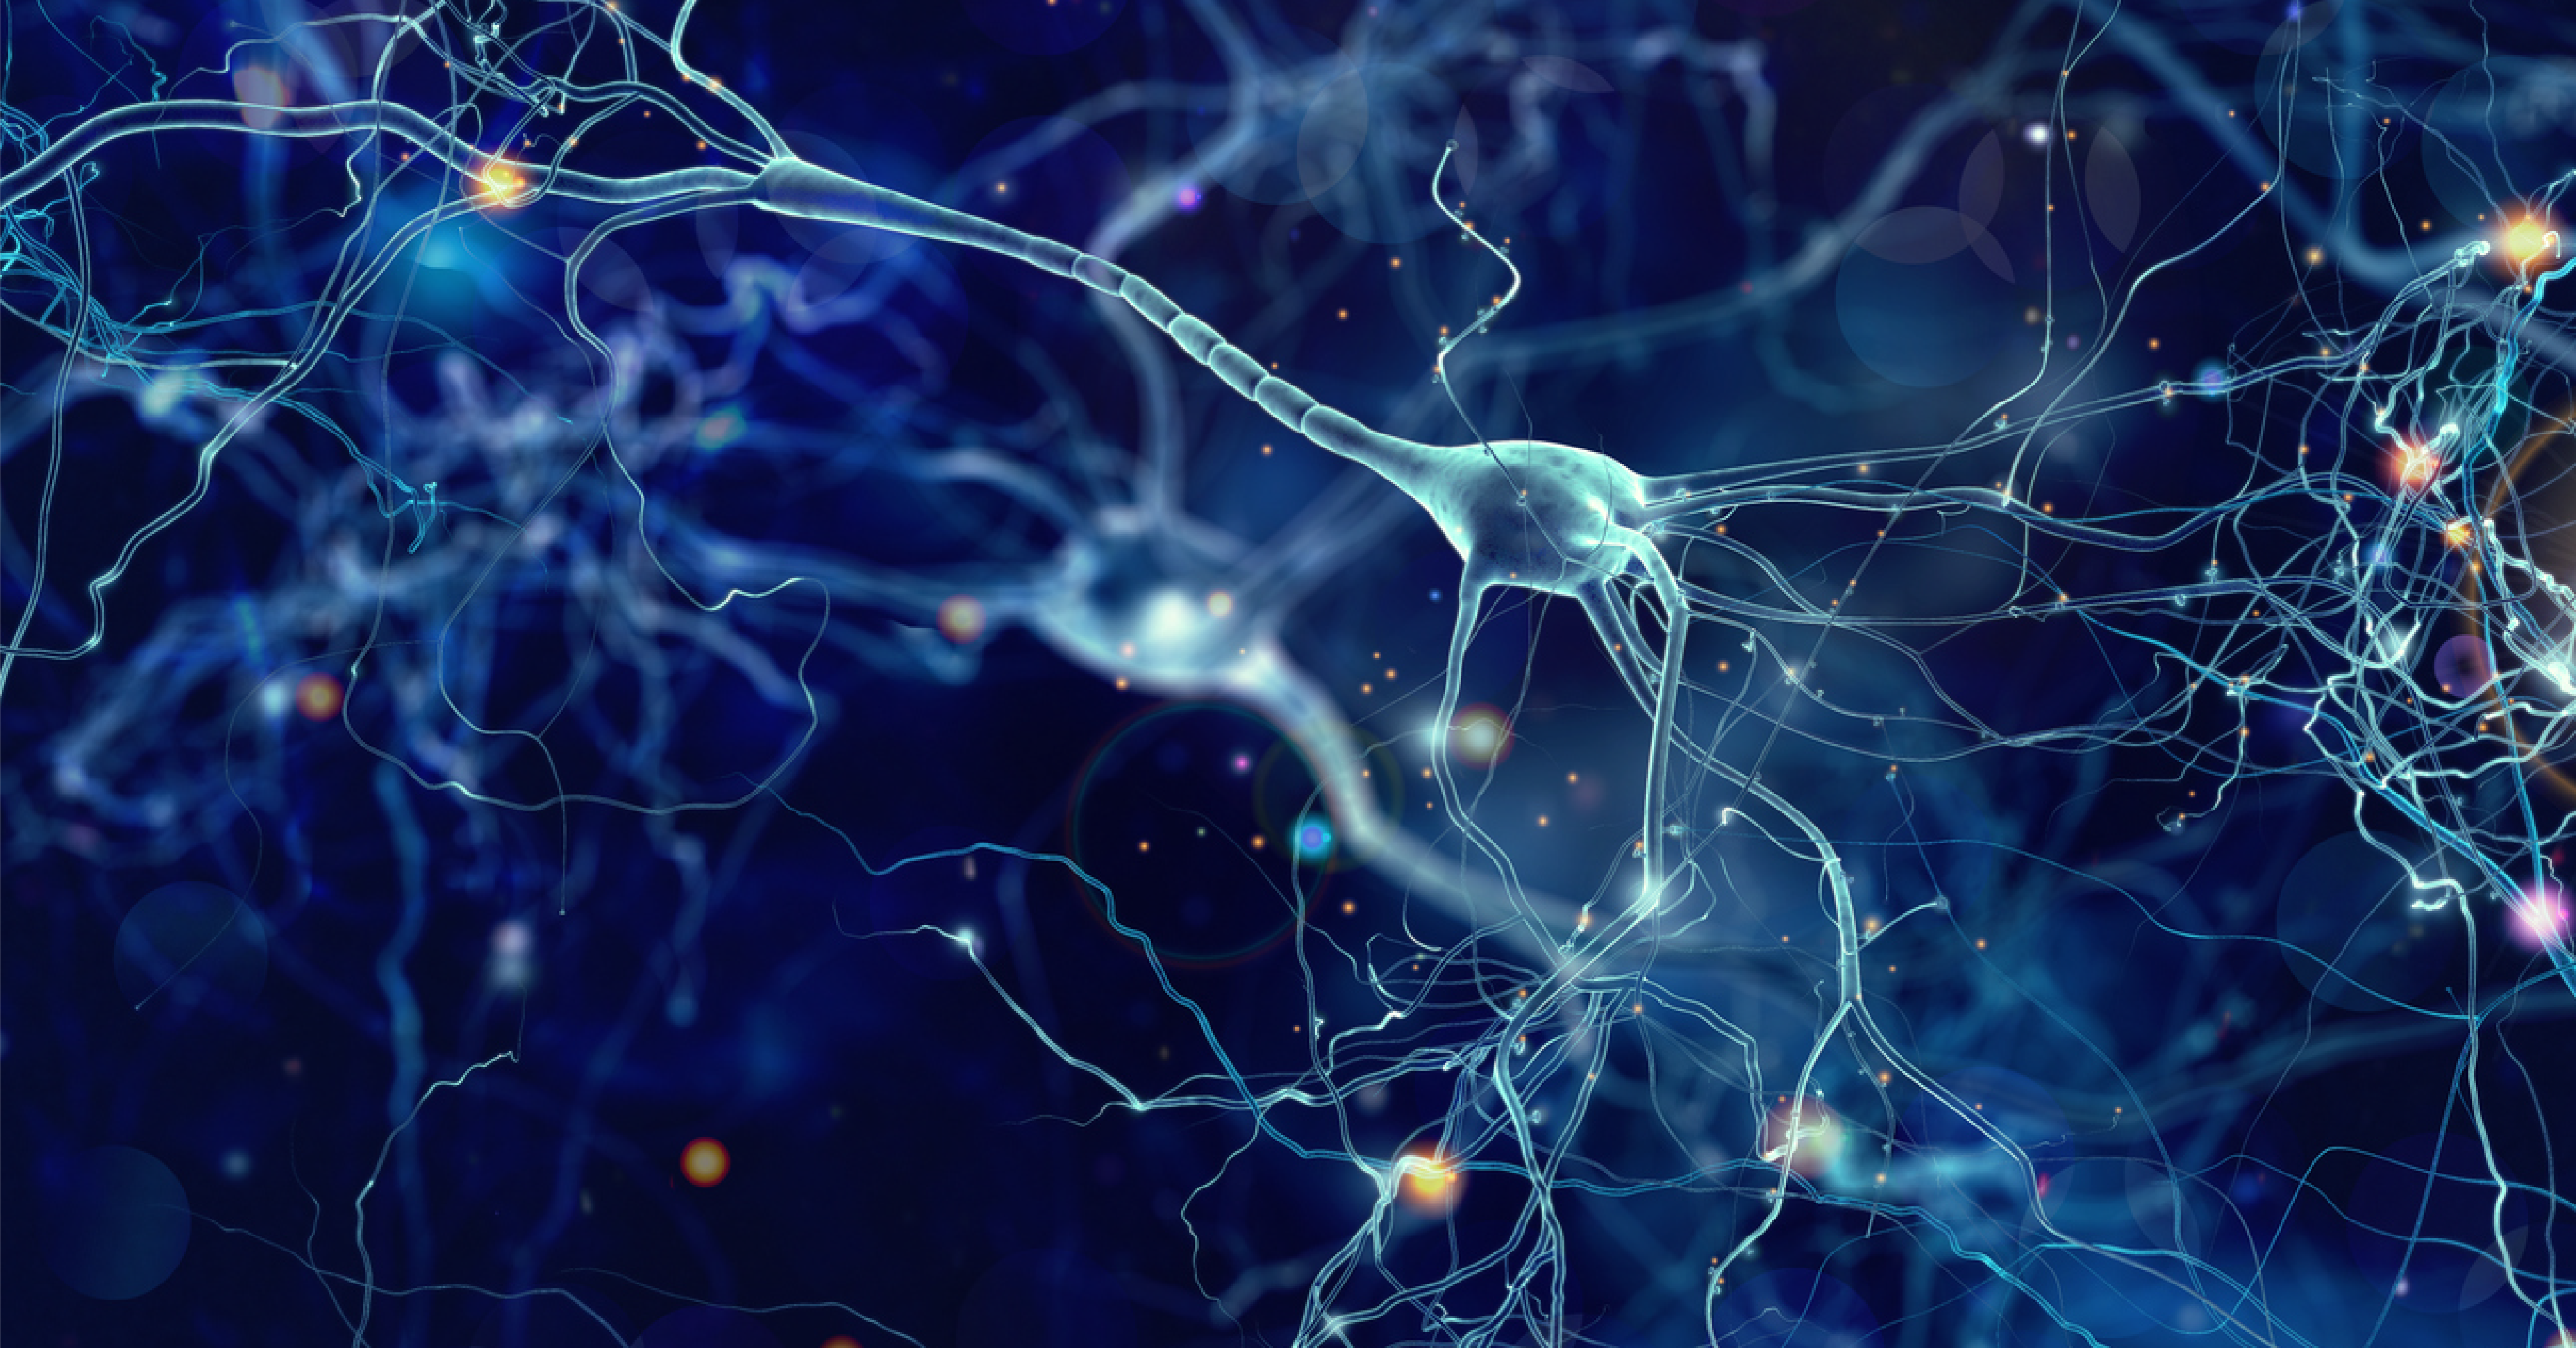 Computer-generated rendering of a series of interconnected brain cells with electrical pulses firing along dendrites